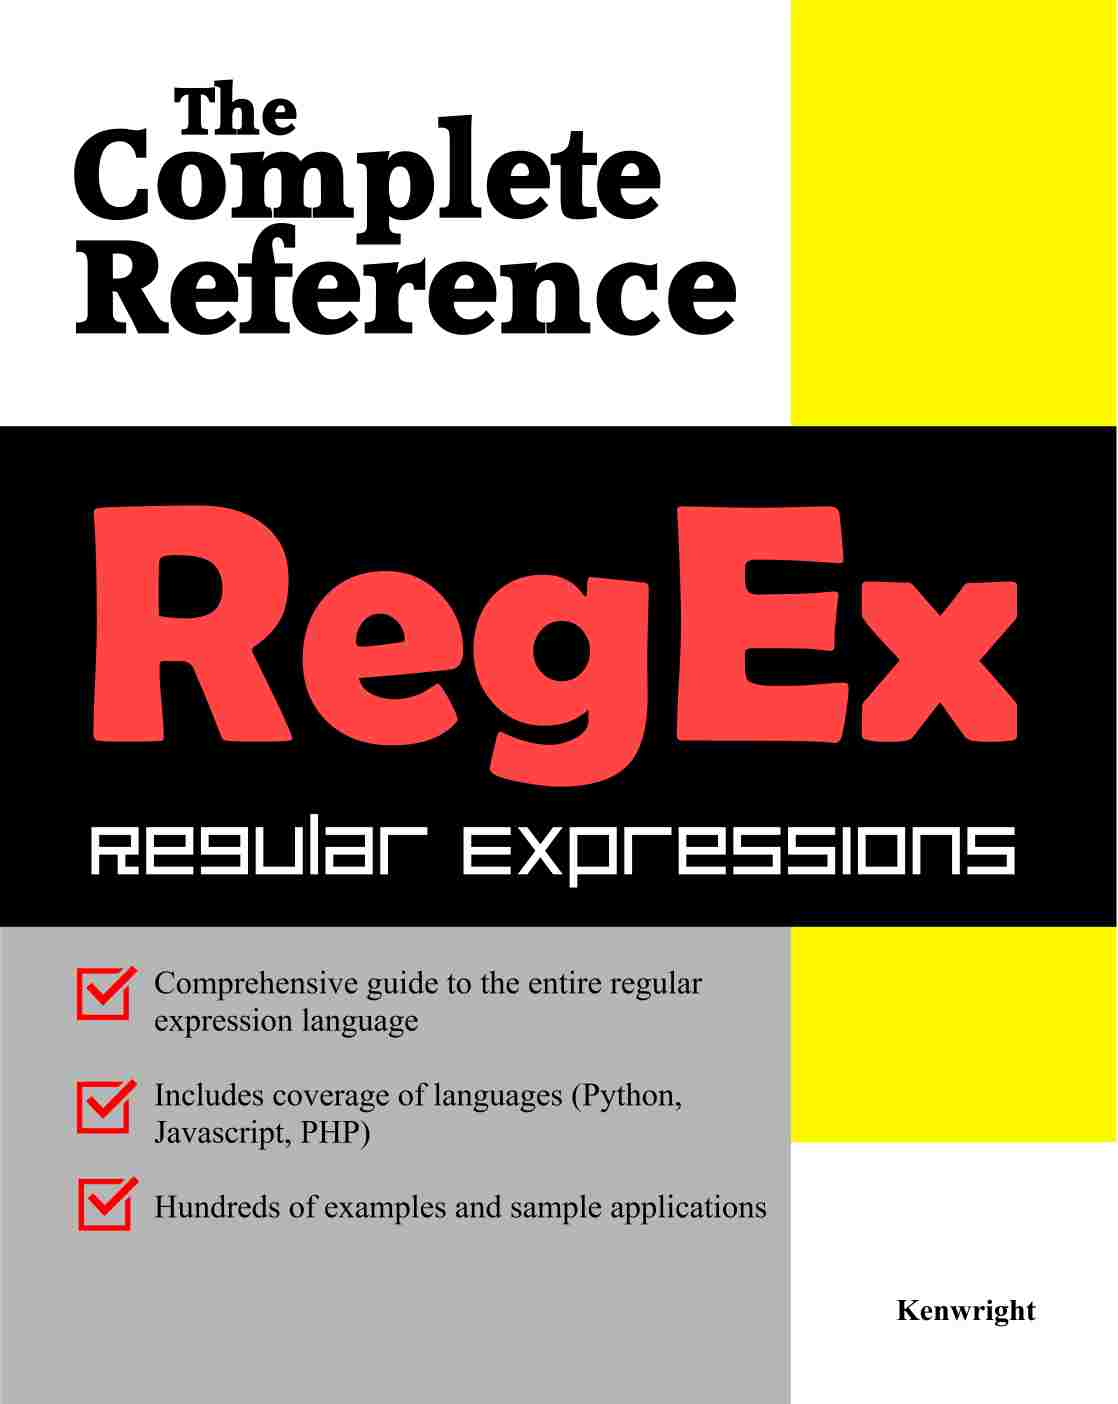 reference regular expressions